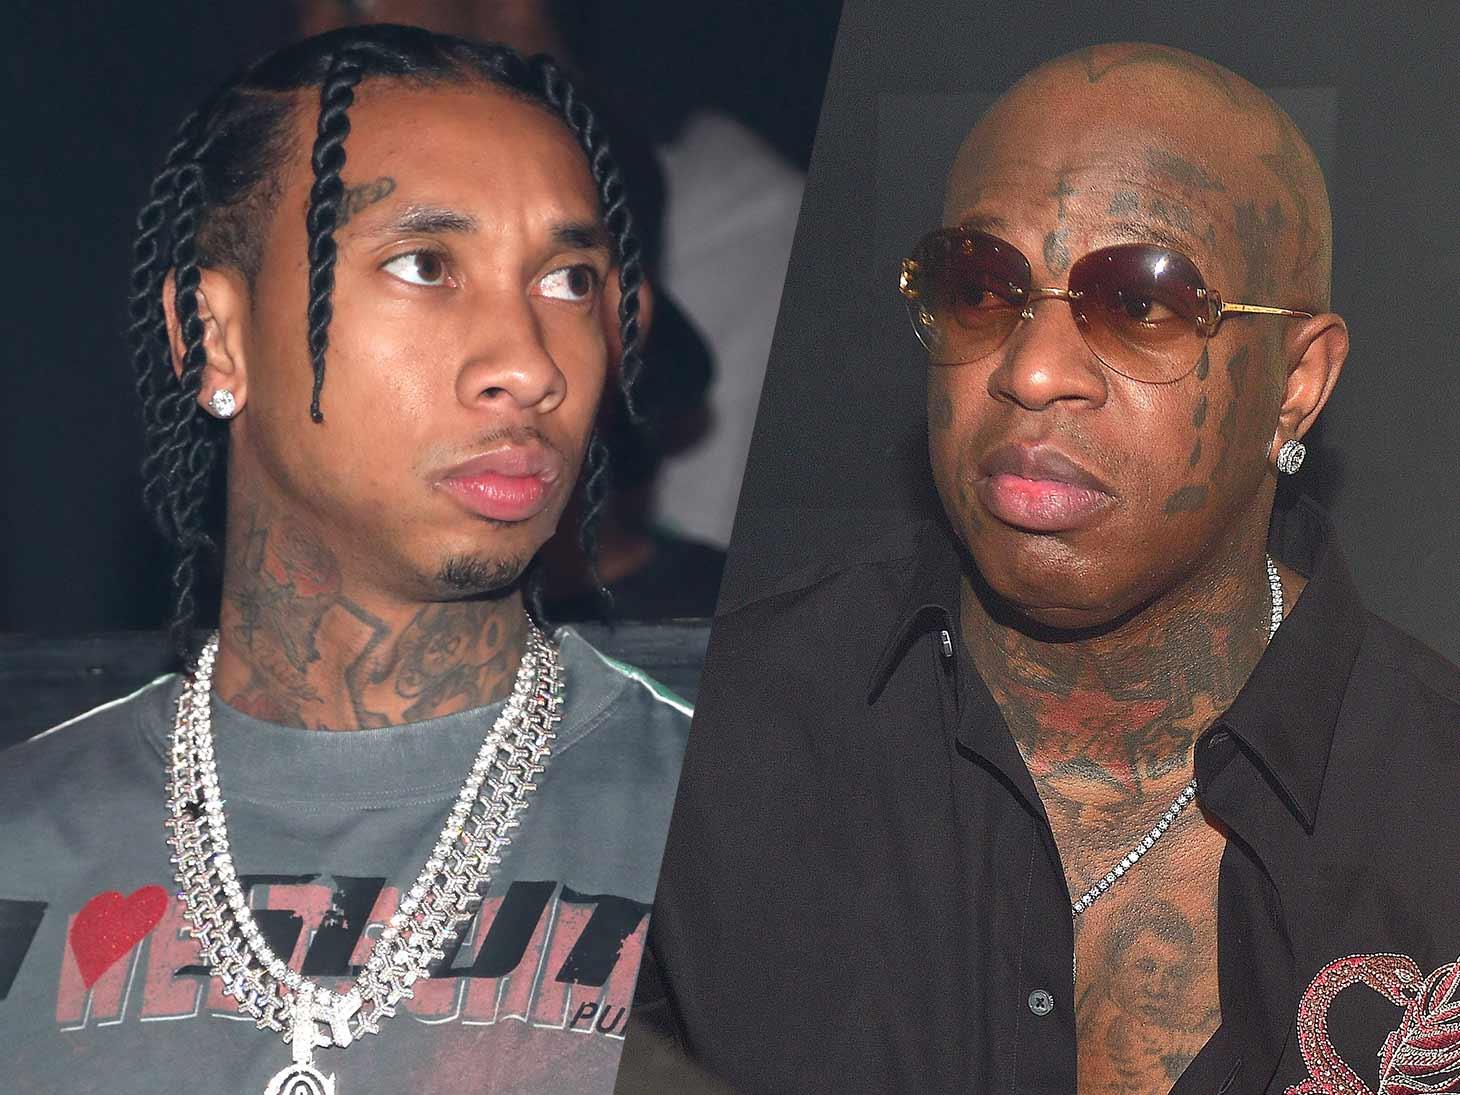 Tyga Accused by Birdman of Owing Cash Money a Significant Amount of Money From Record Advances